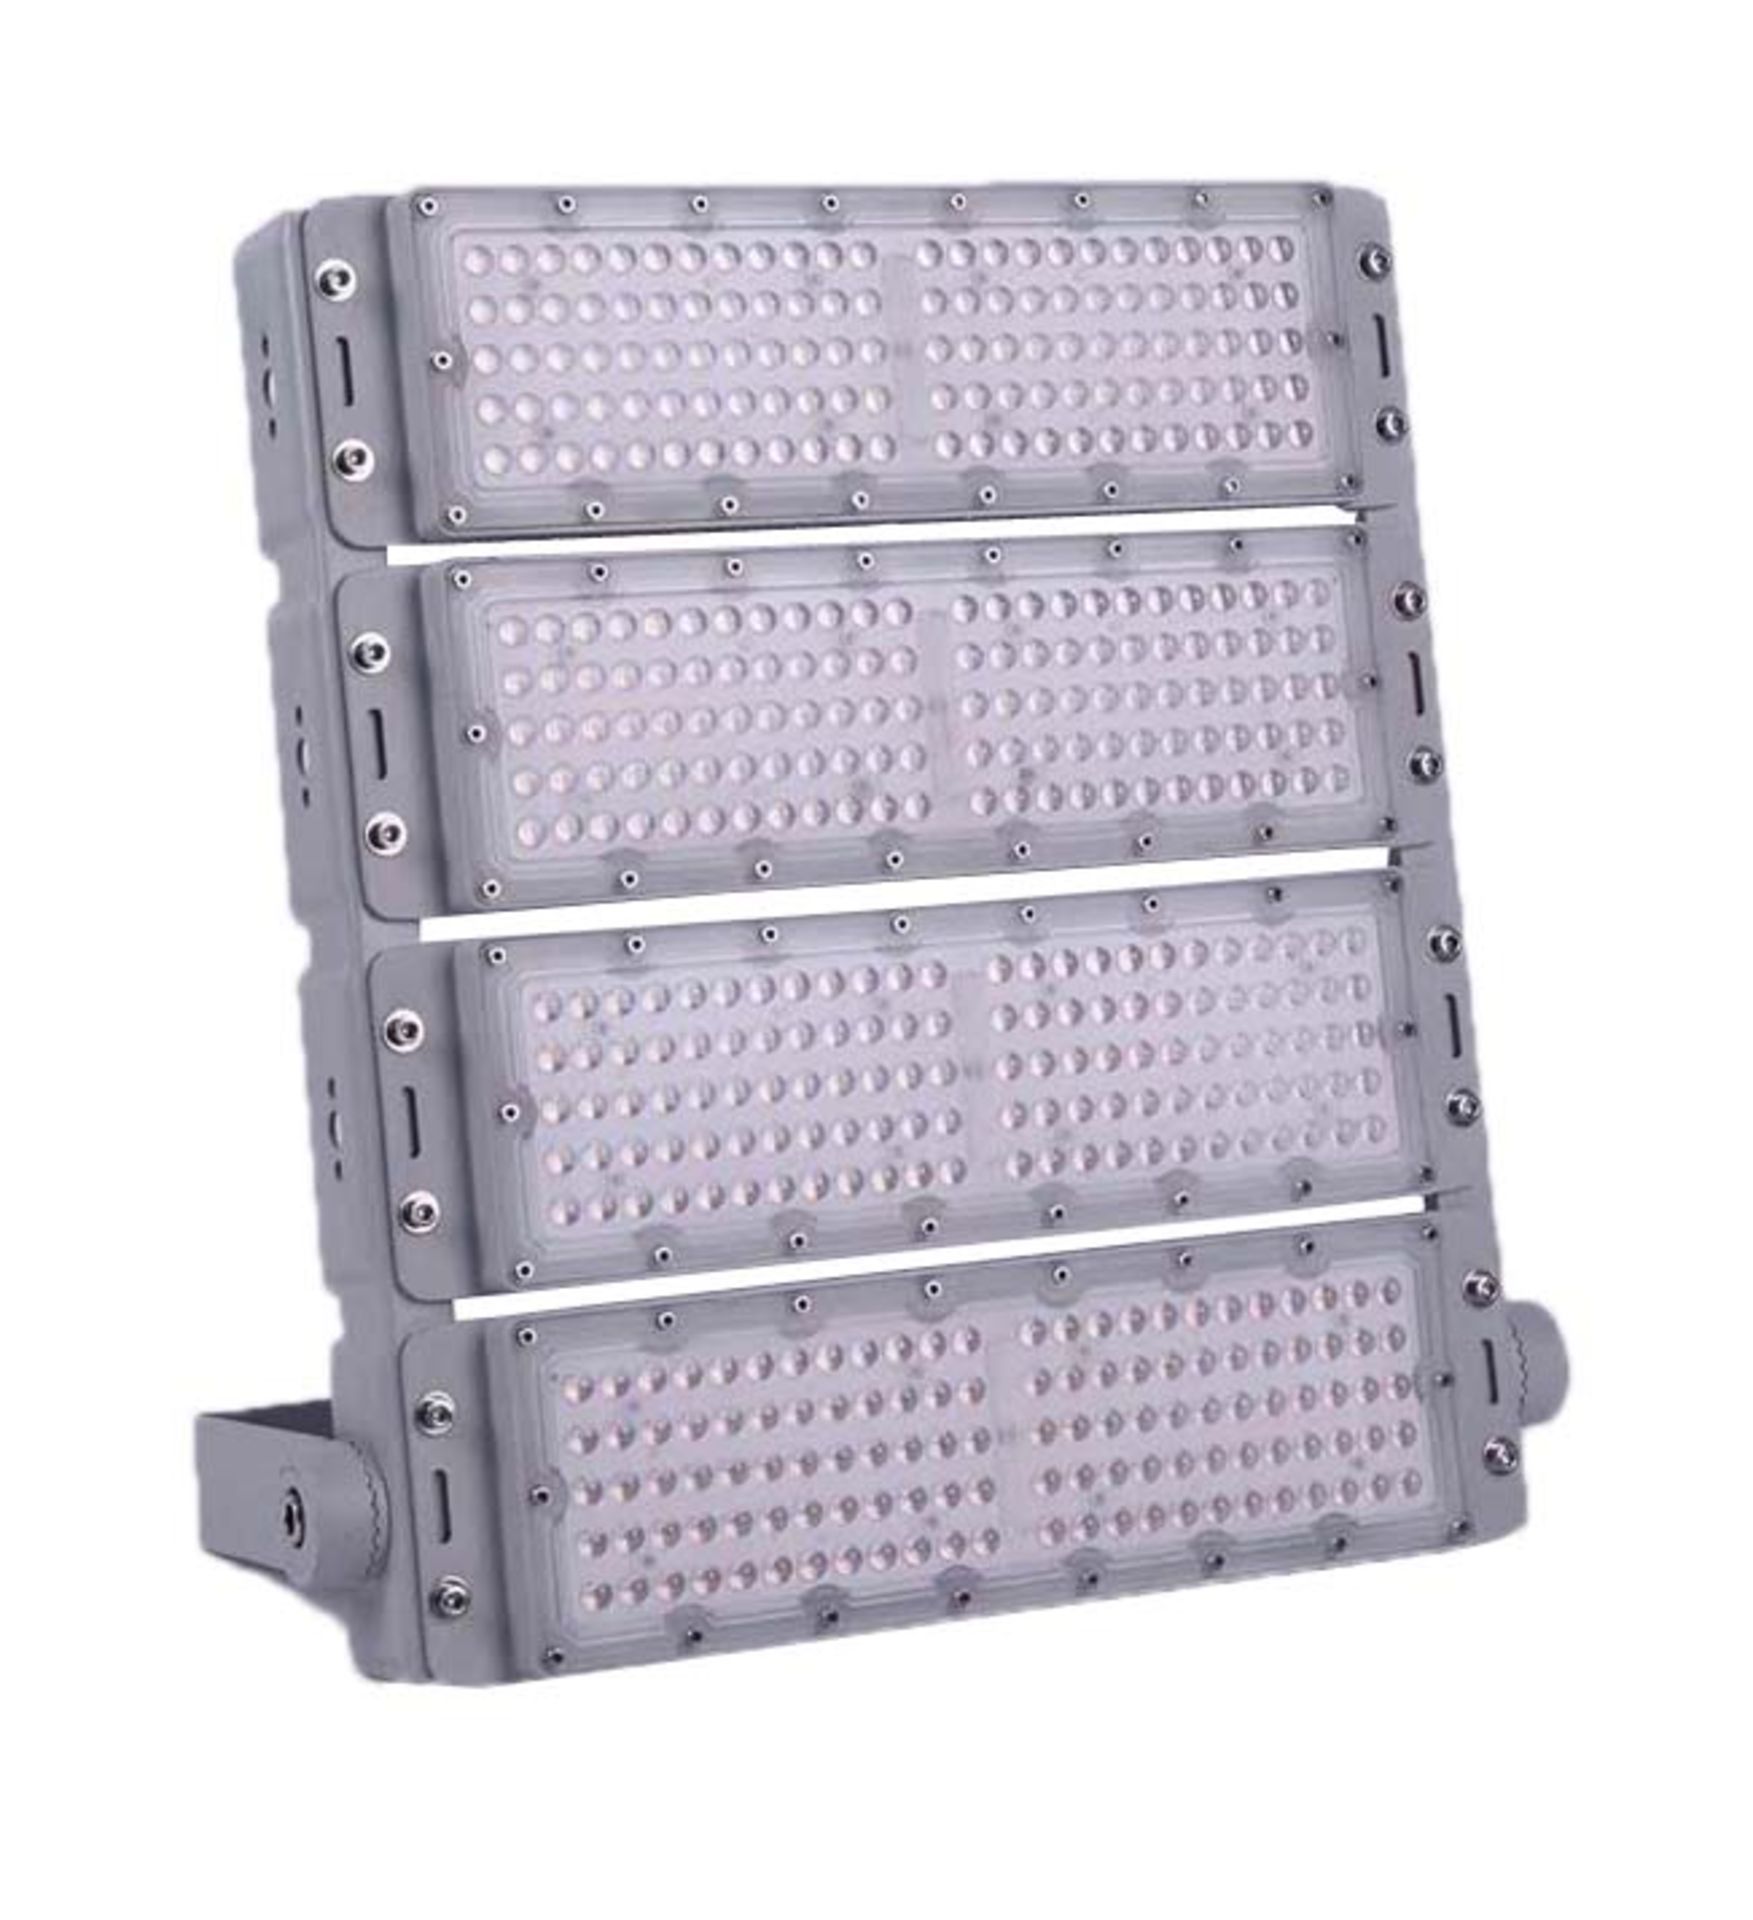 2 x LED400 Watt Flood Light Panel - For Car Parks, Security, Playing fields, Football pitches etc - Image 5 of 8